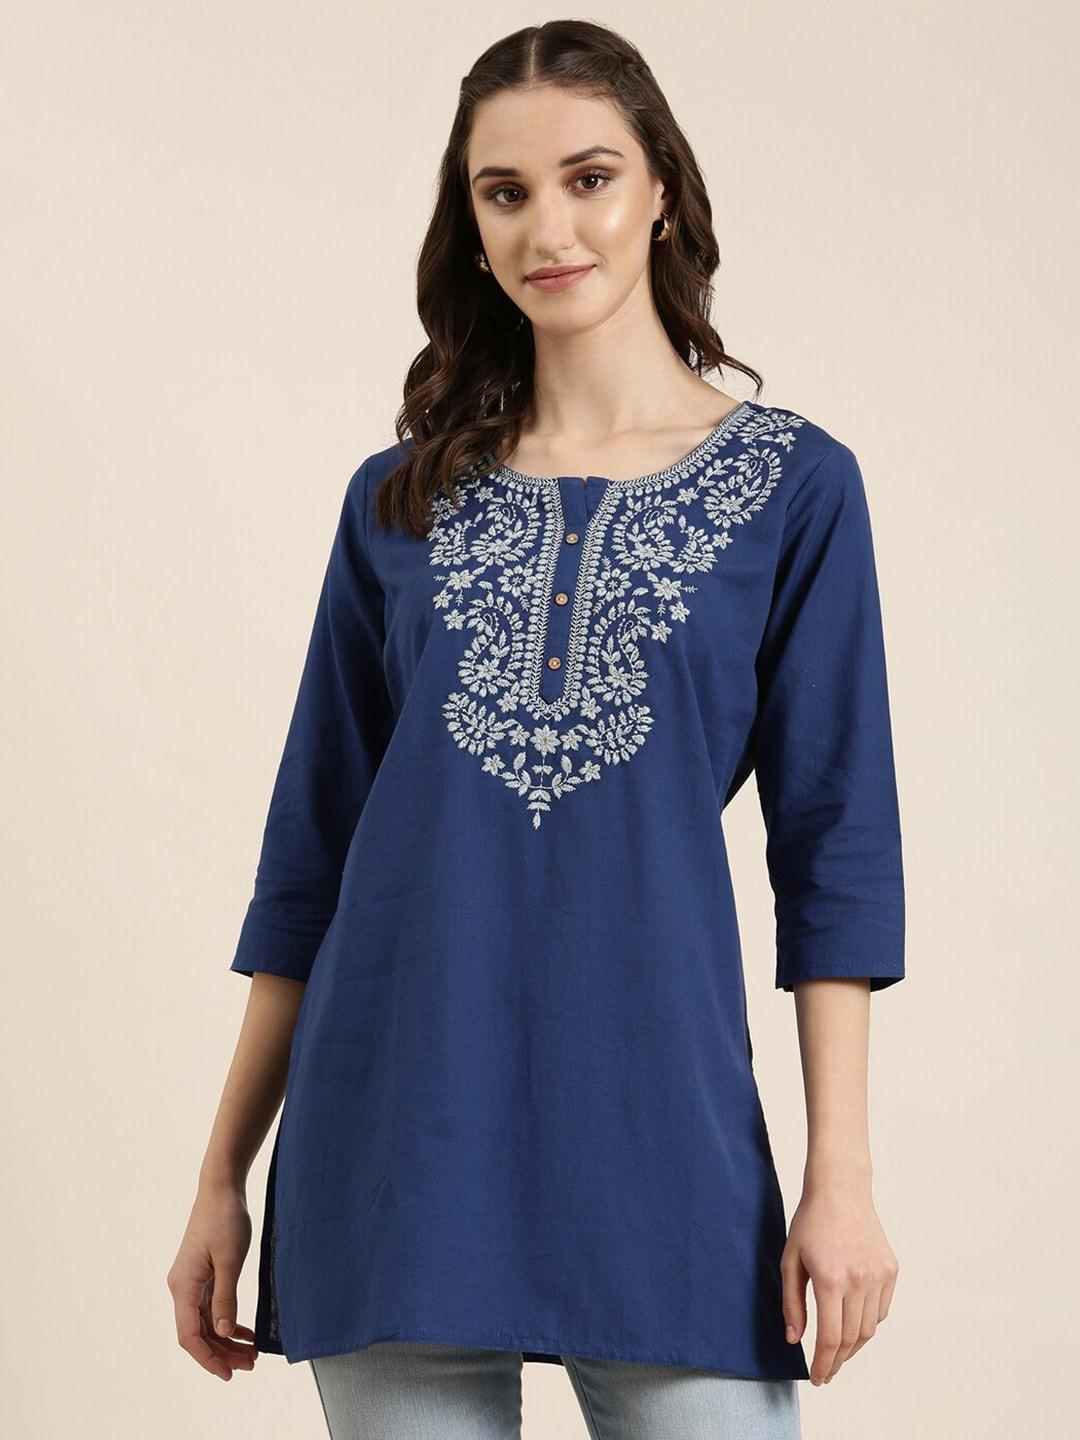 showoff-floral-embroidered-round-neck-kurti